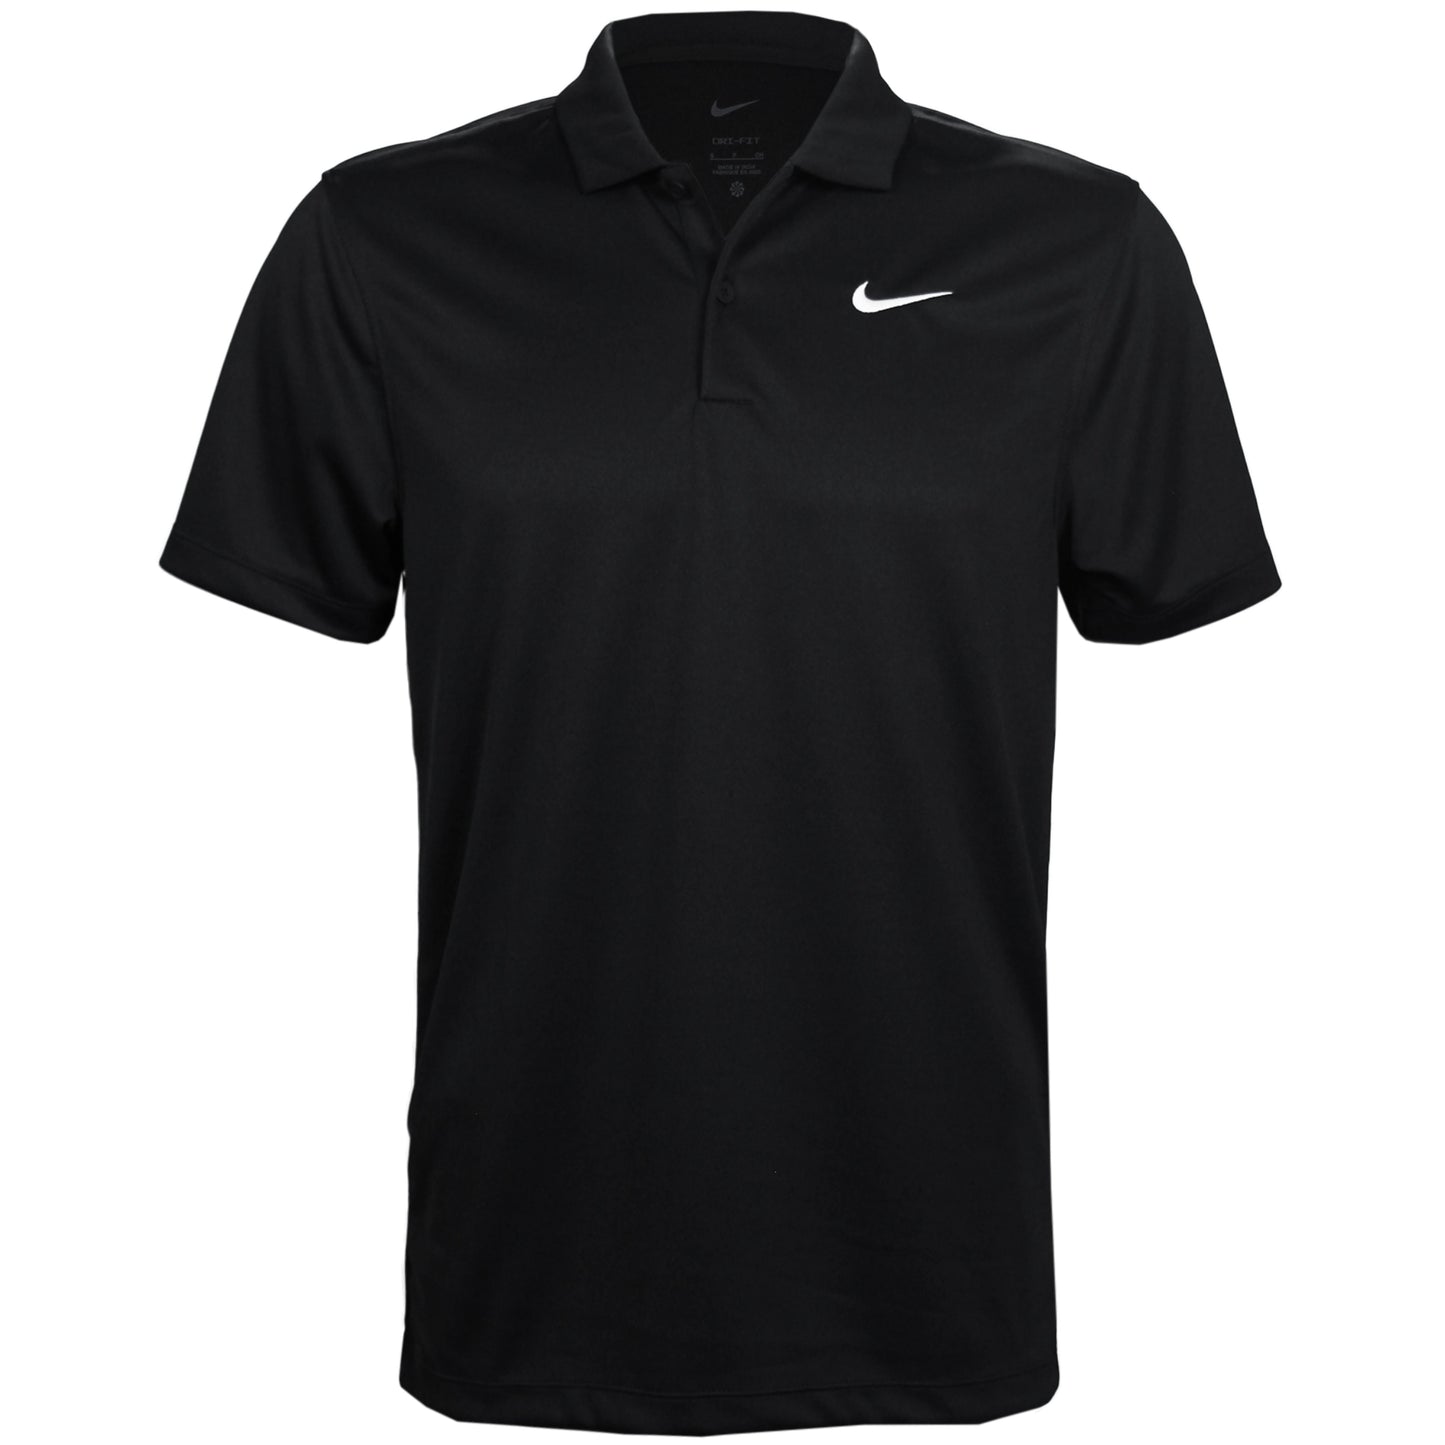 Nike Men's Court DF Solid Polo DH0857-010